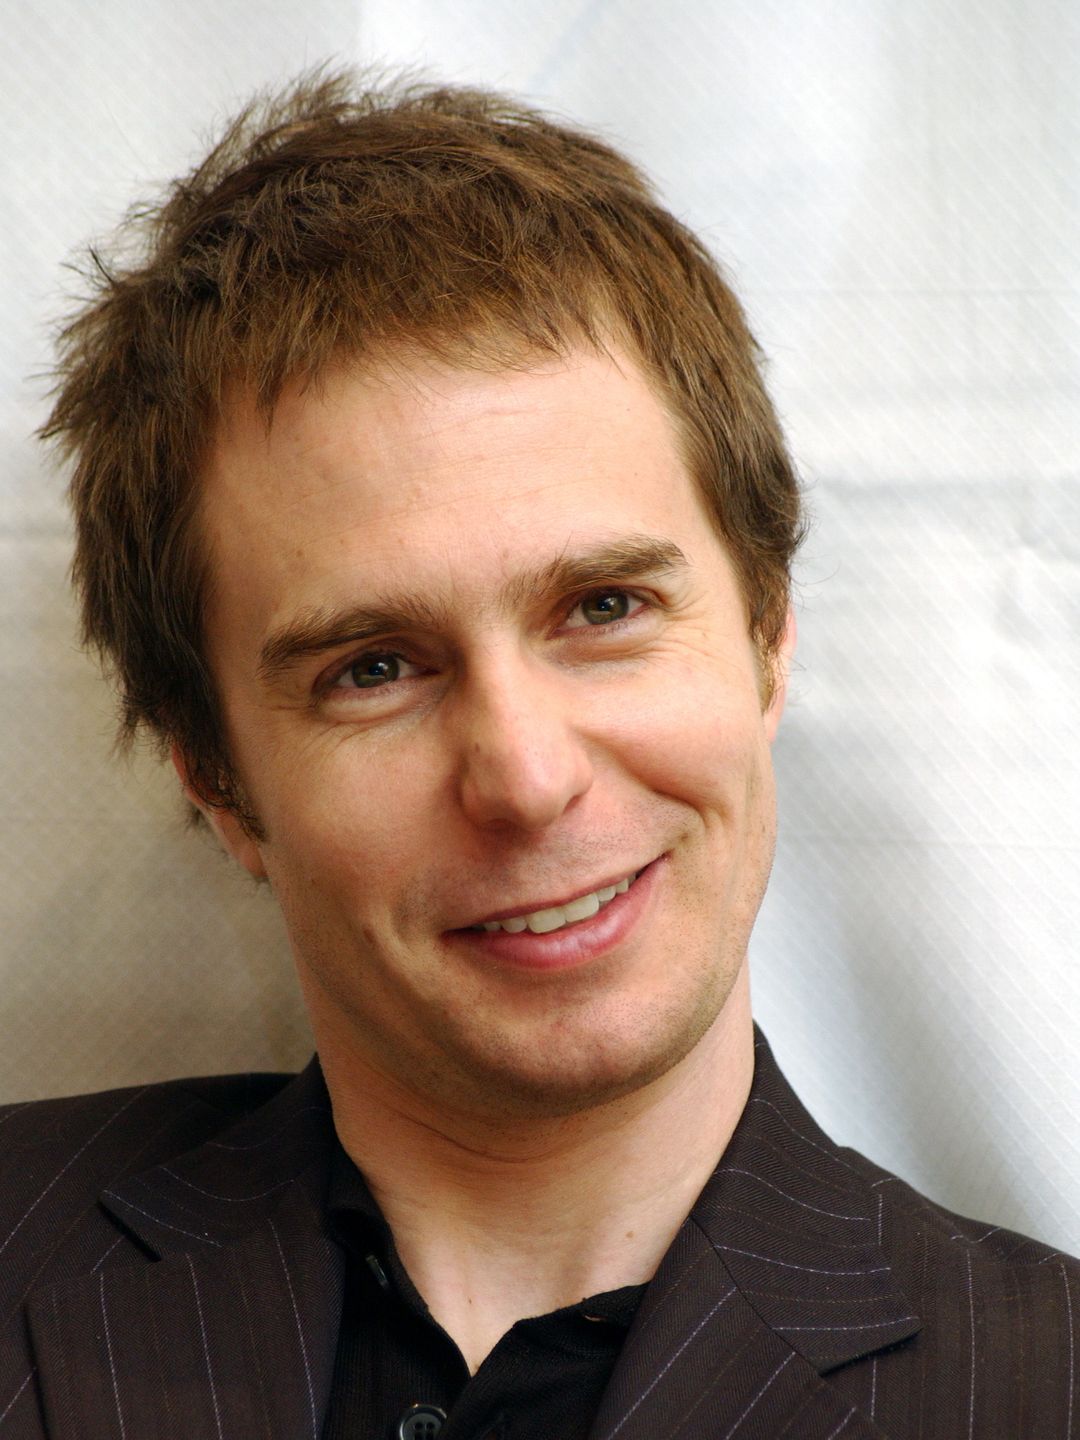 Sam Rockwell story of success